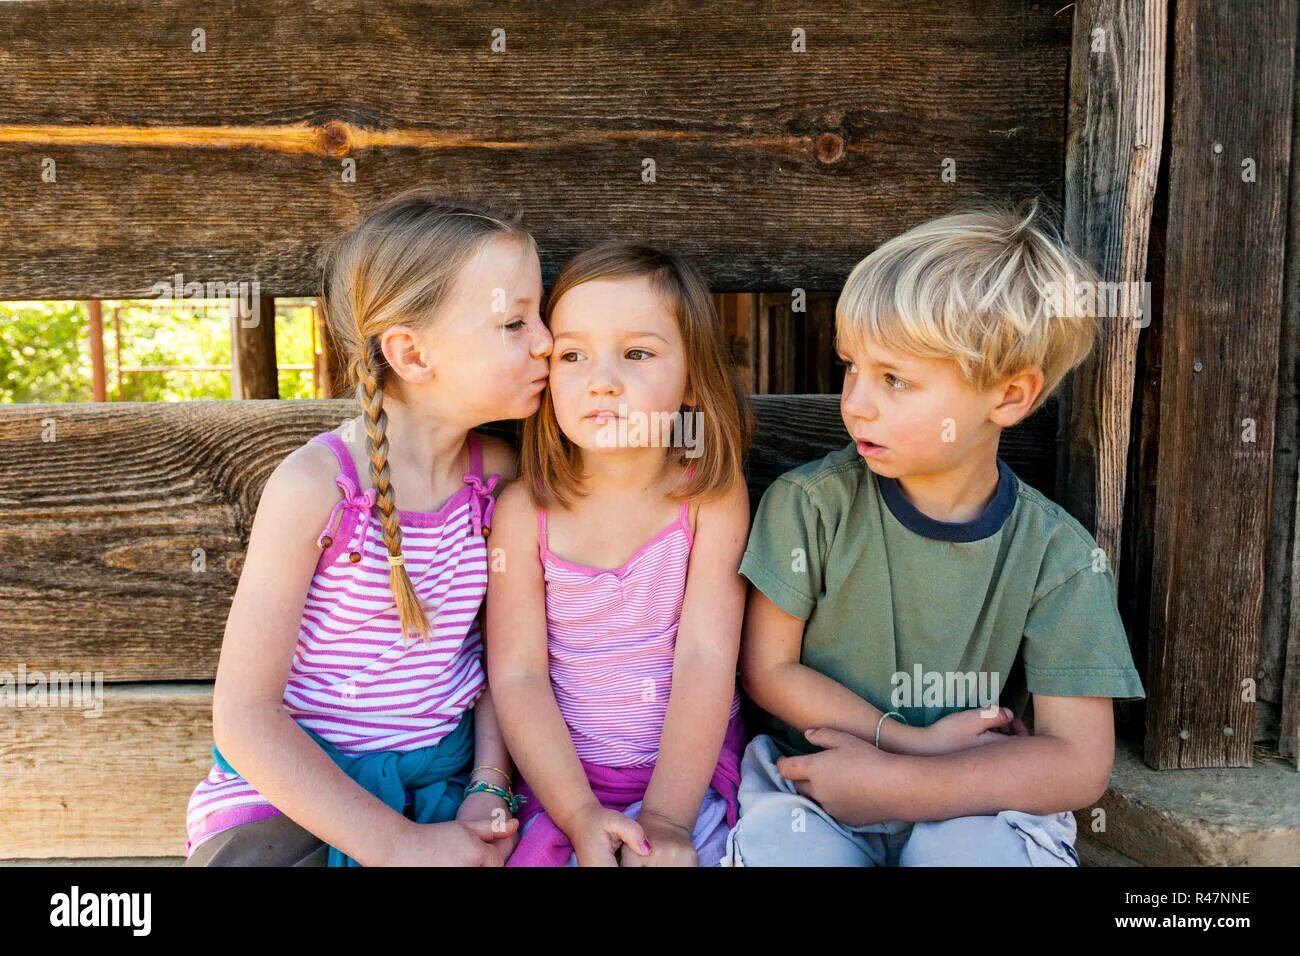 Little young girls private. Two brothers kissing Фотобанк Лори. Сестры Литл.. Два мальчика и одна девочка во дворе.